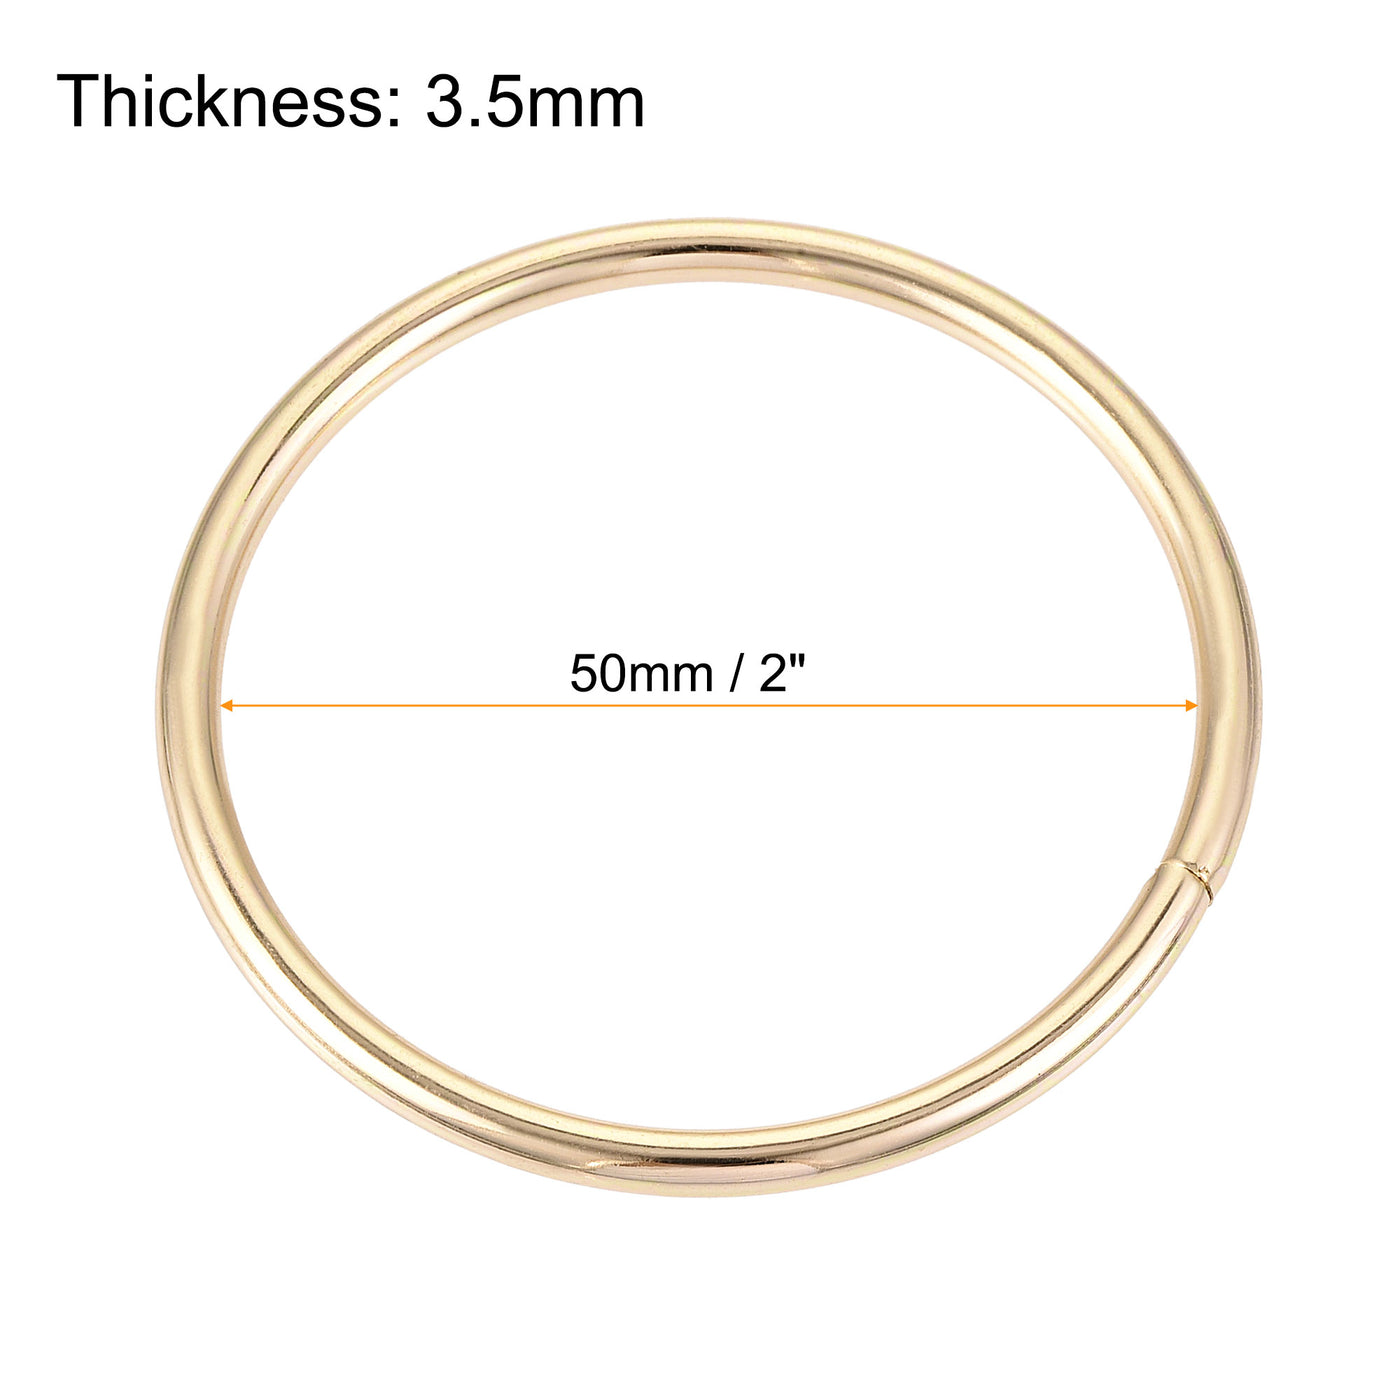 uxcell Uxcell 50mm Metal O Rings Non-Welded for Straps Bags Belts DIY Gold Tone 10pcs